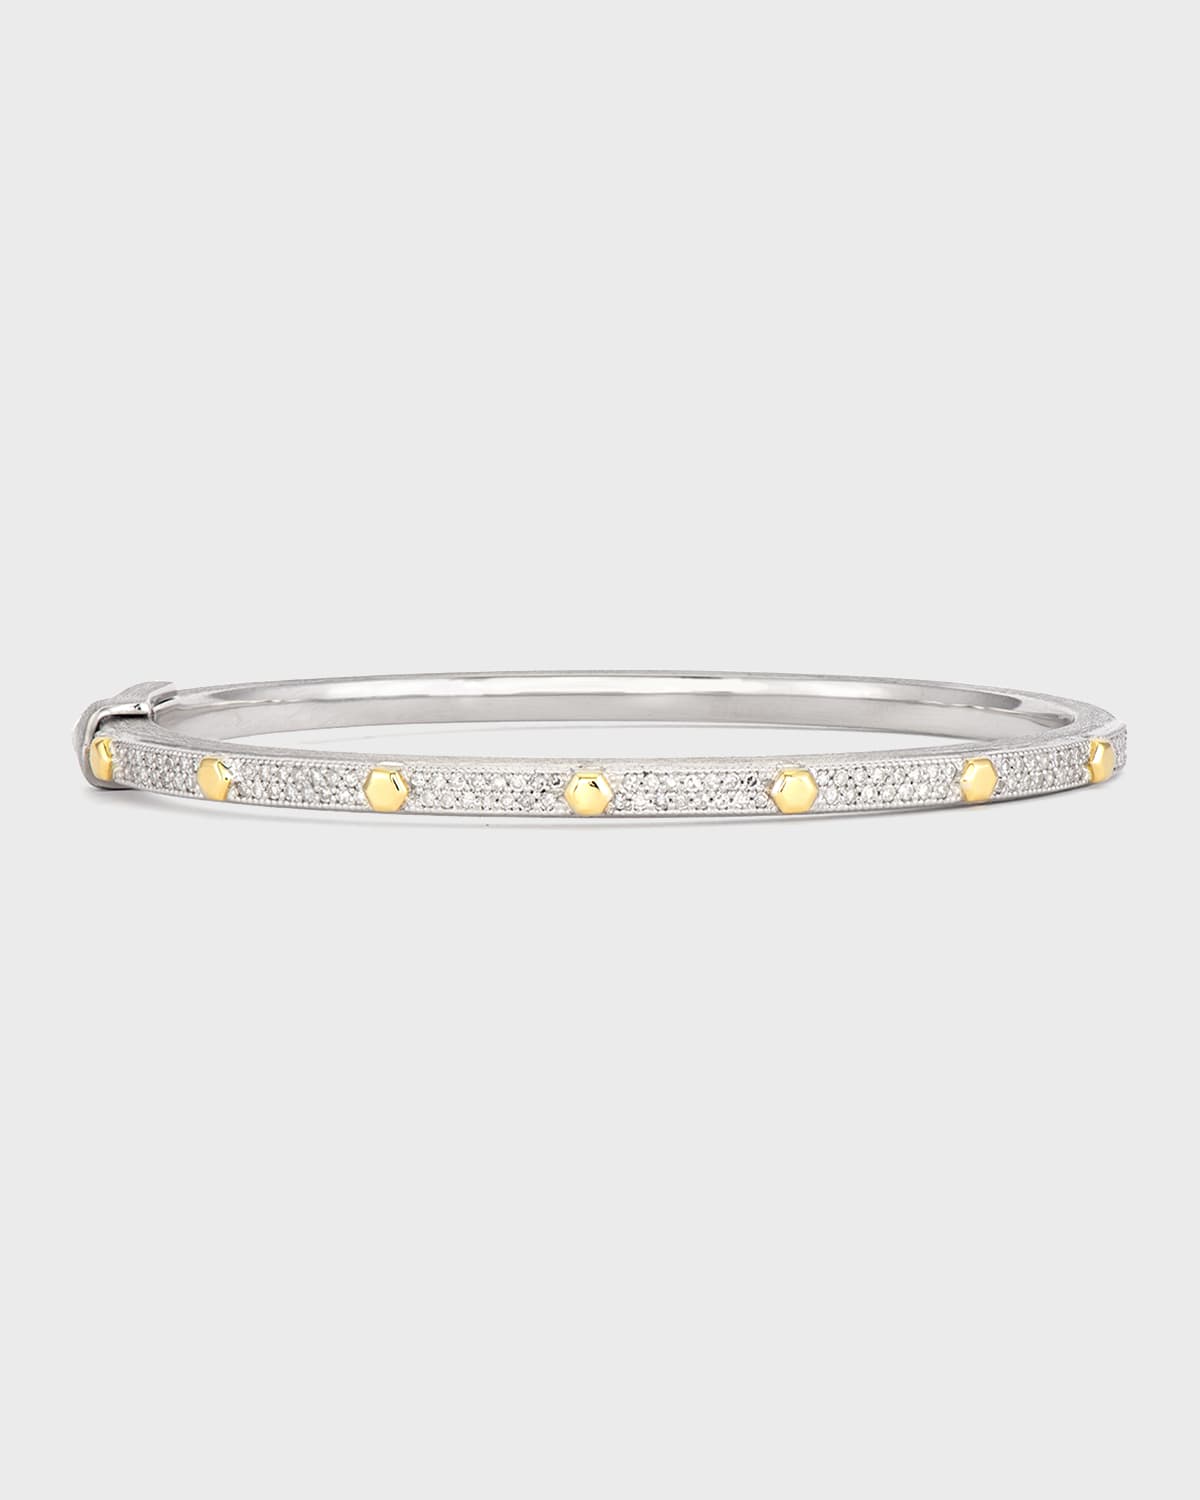 Jude Frances Mixed Metal Provence Diamond Bangle with Gold Hexagon Stations